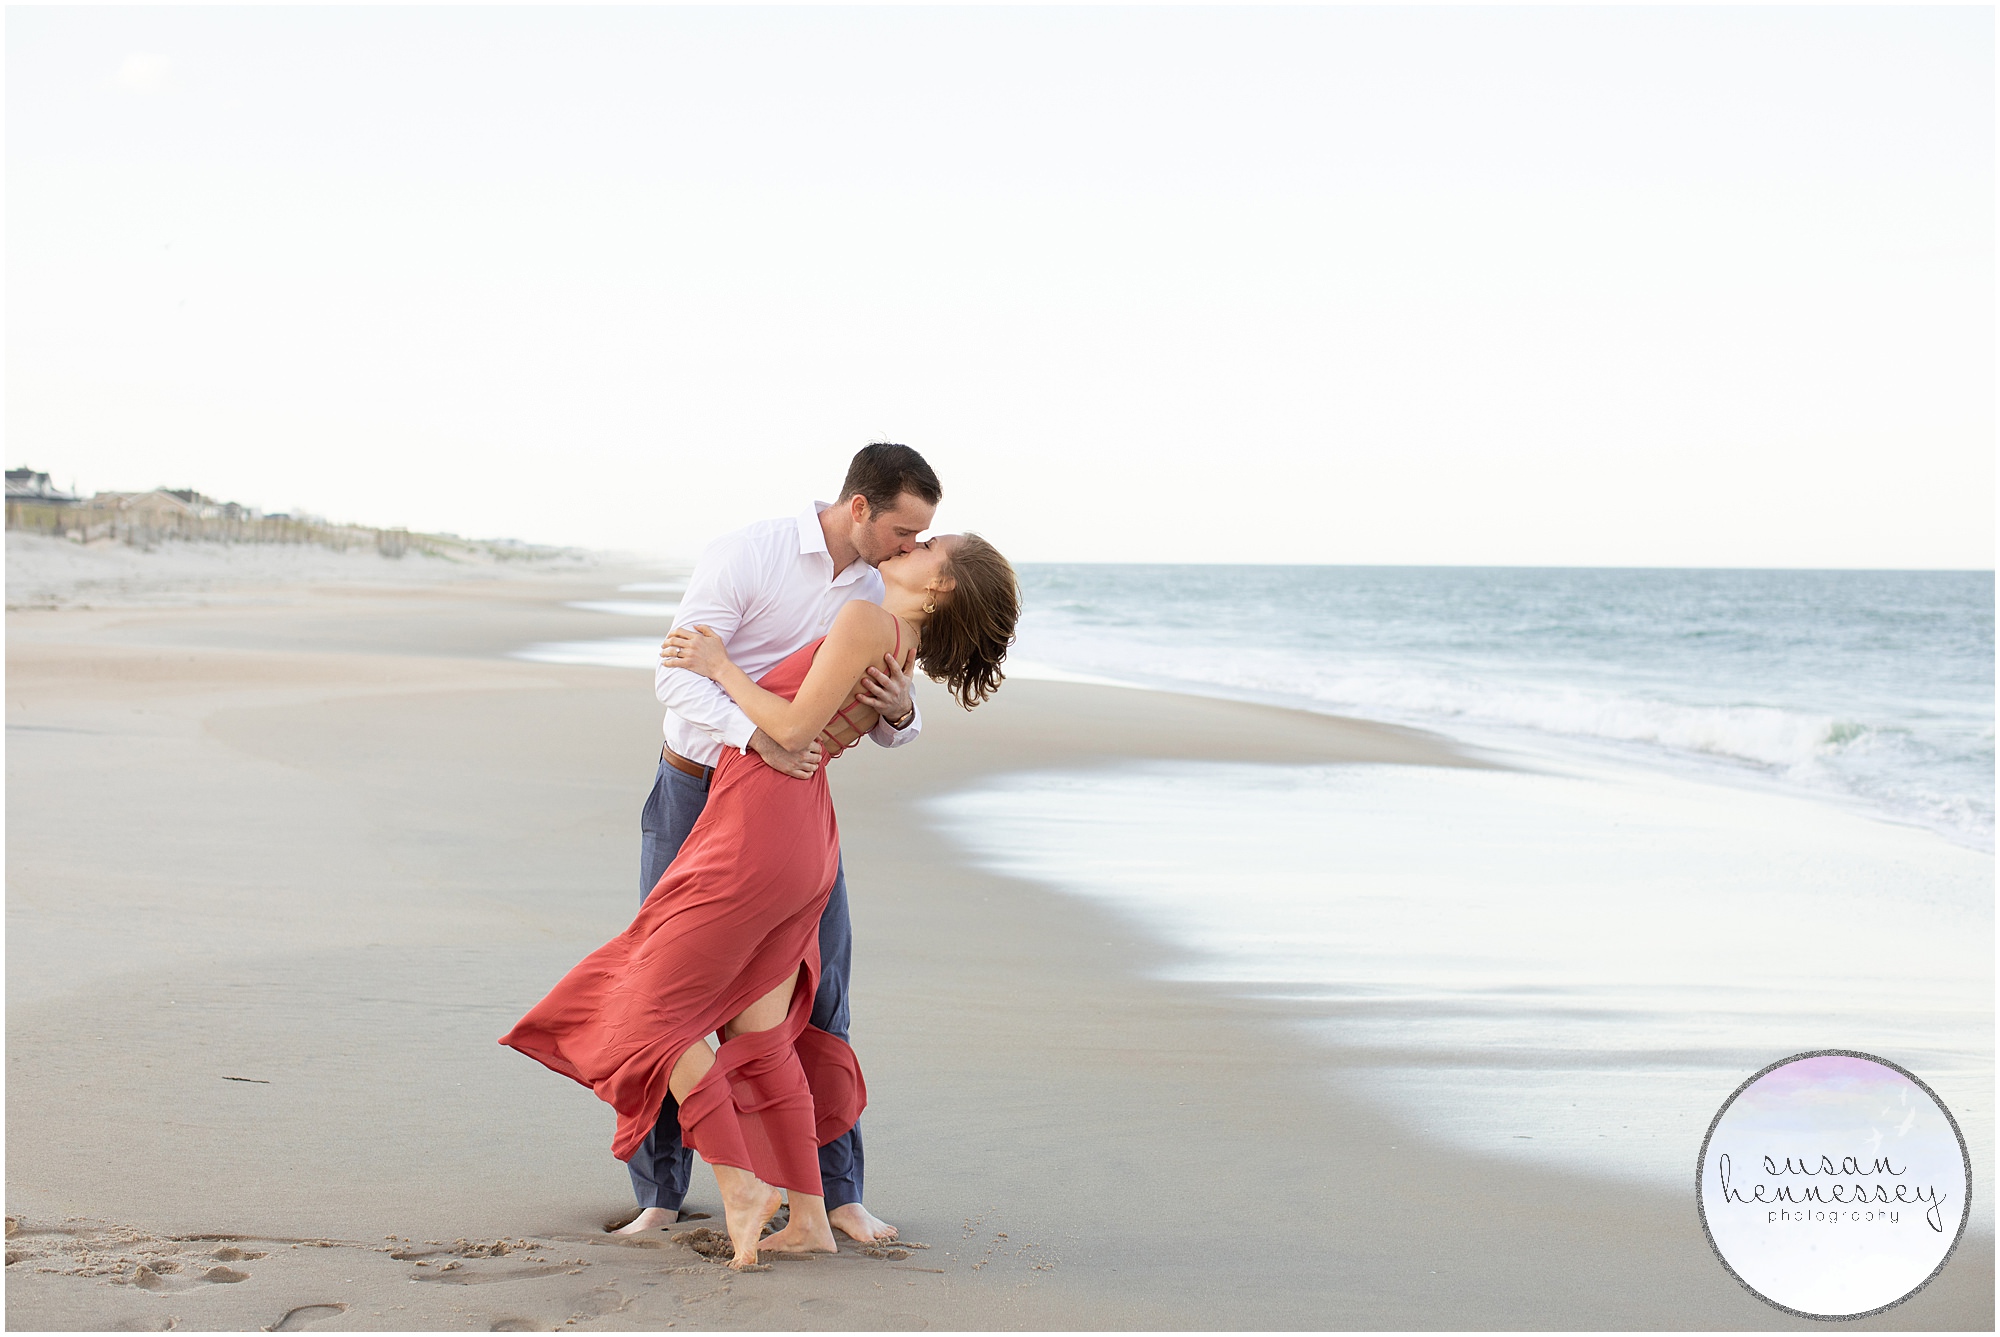 An engaged couple kiss by the ocean.